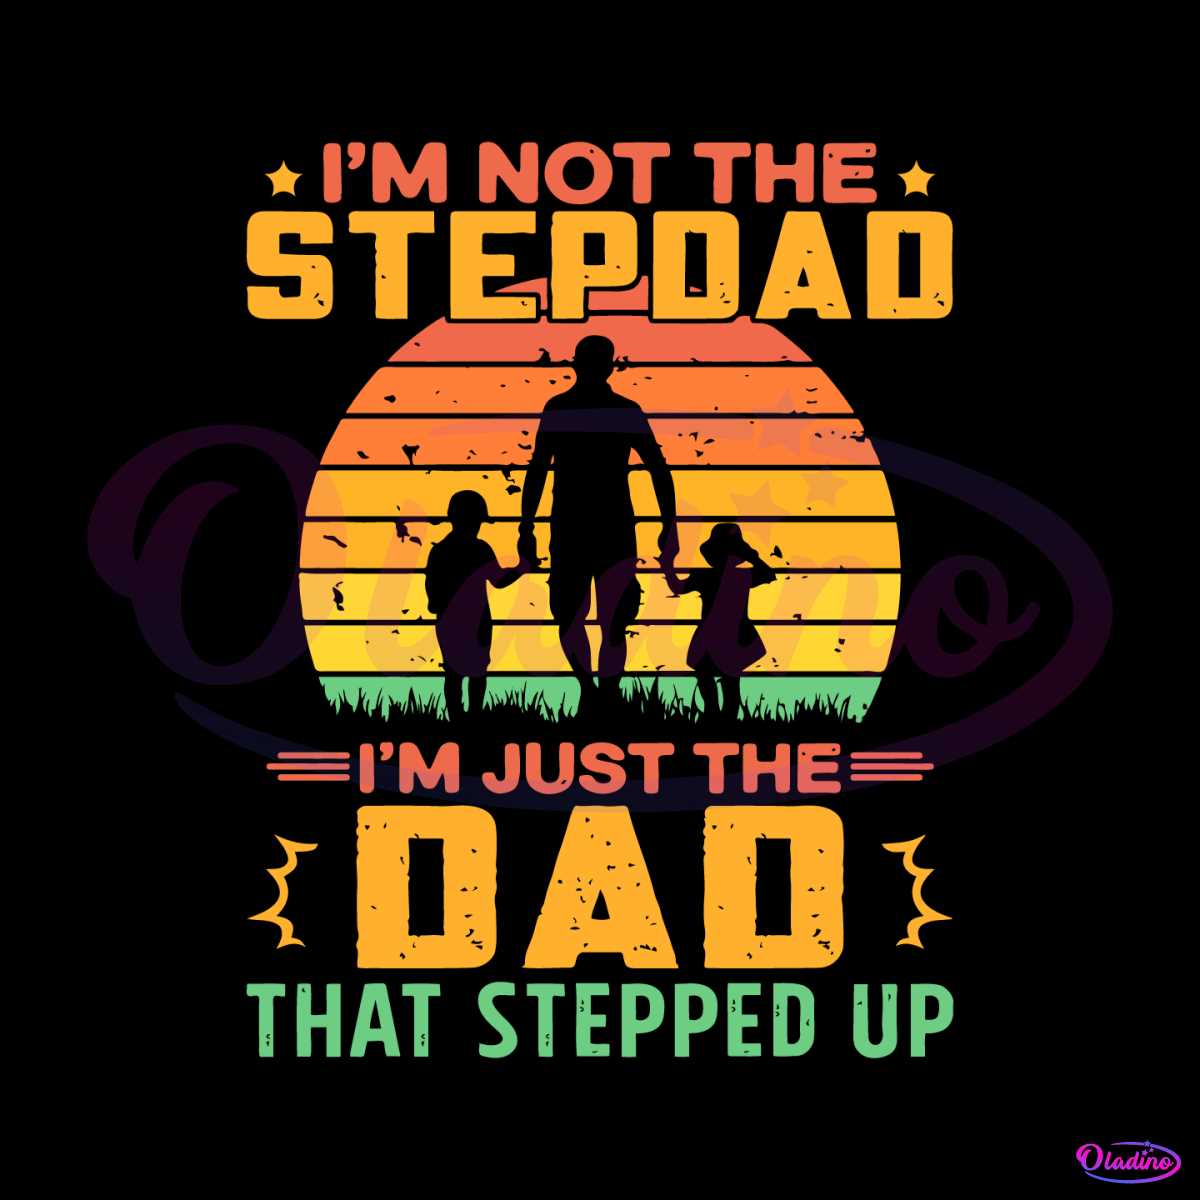 im-not-the-stepdad-im-just-the-dad-that-stepped-up-svg-file